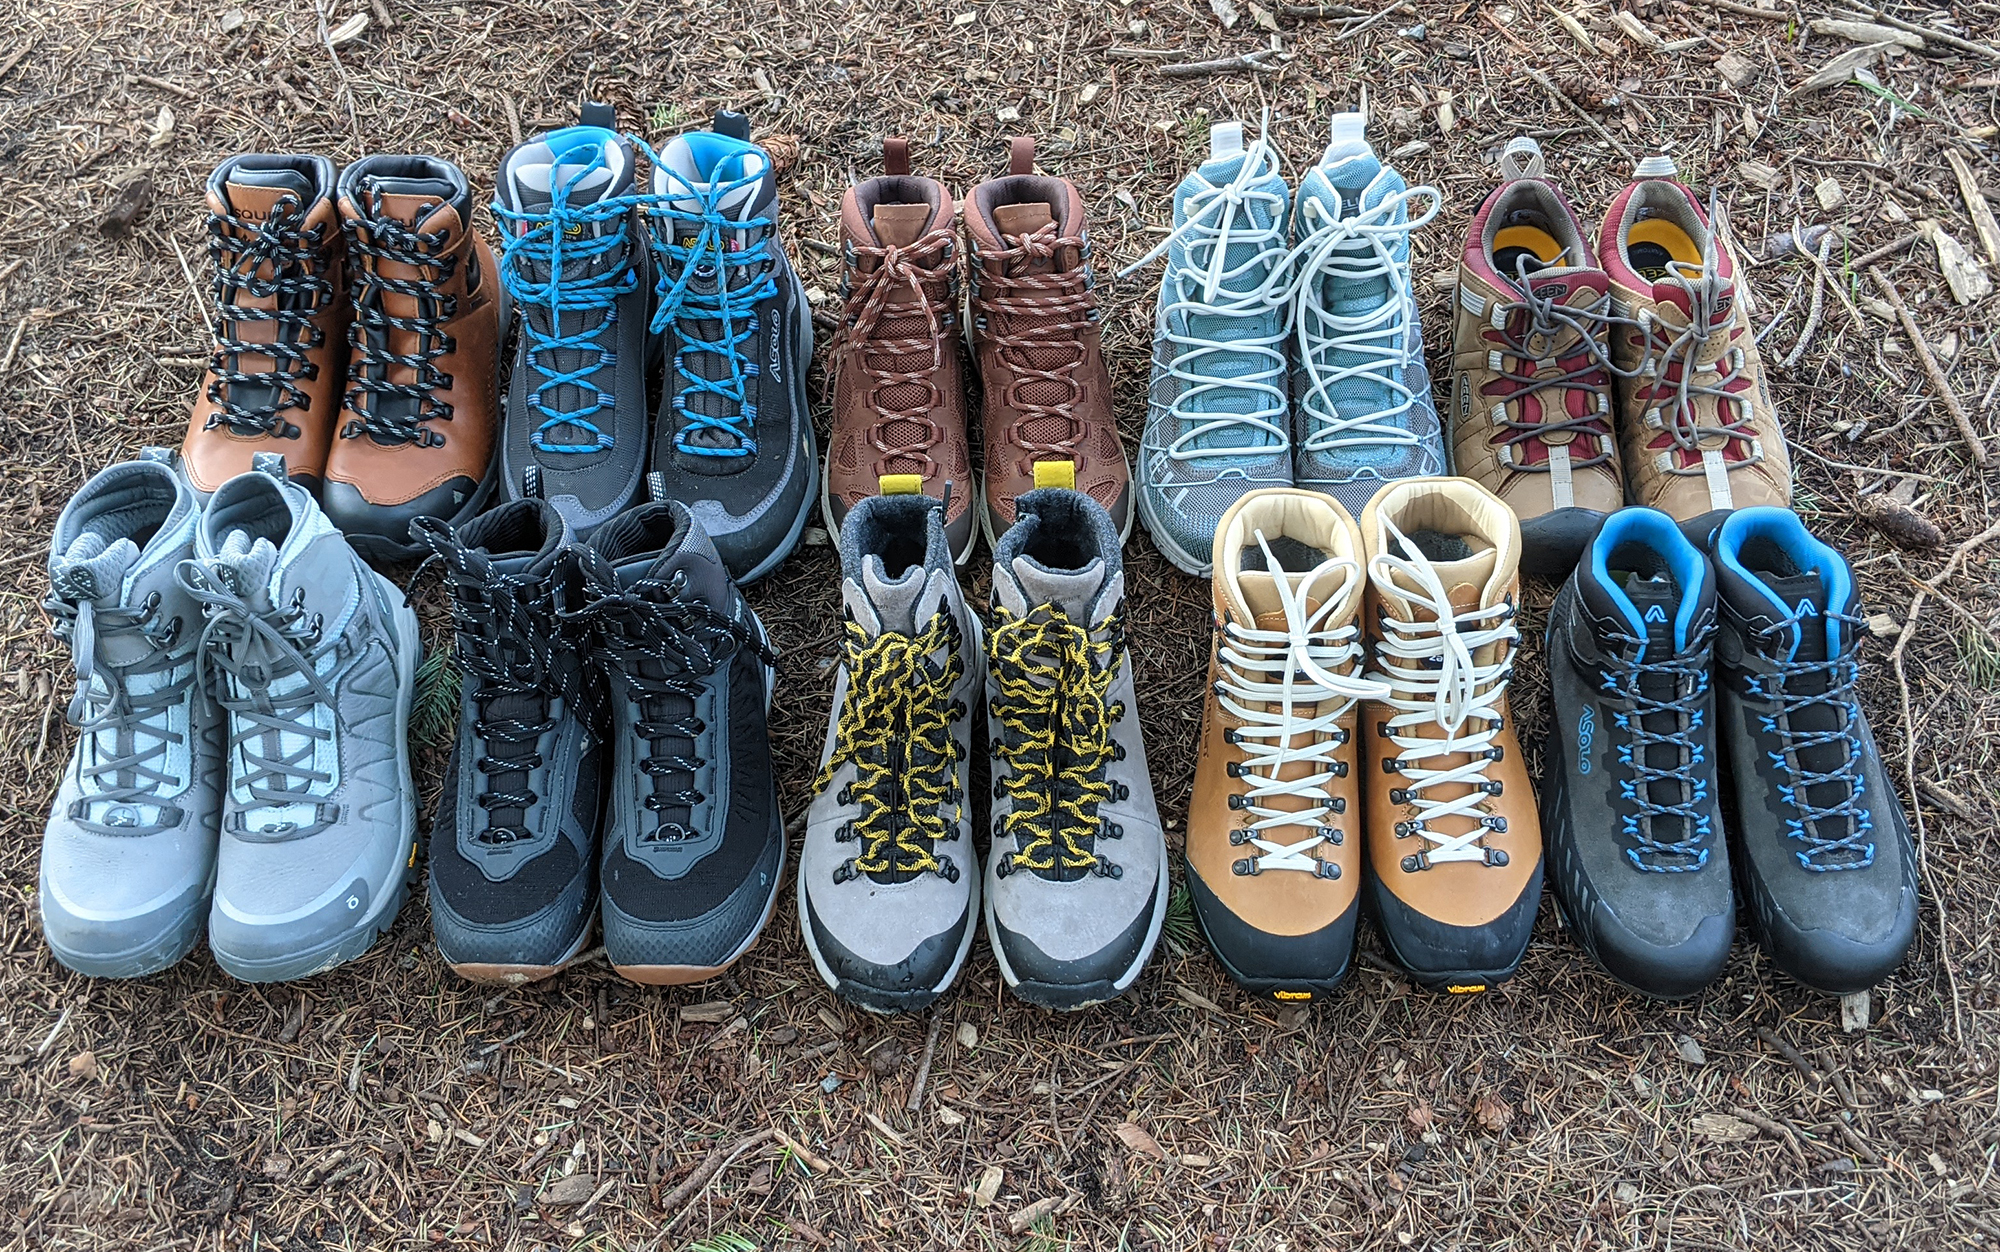 We tested the best waterproof hiking boots.